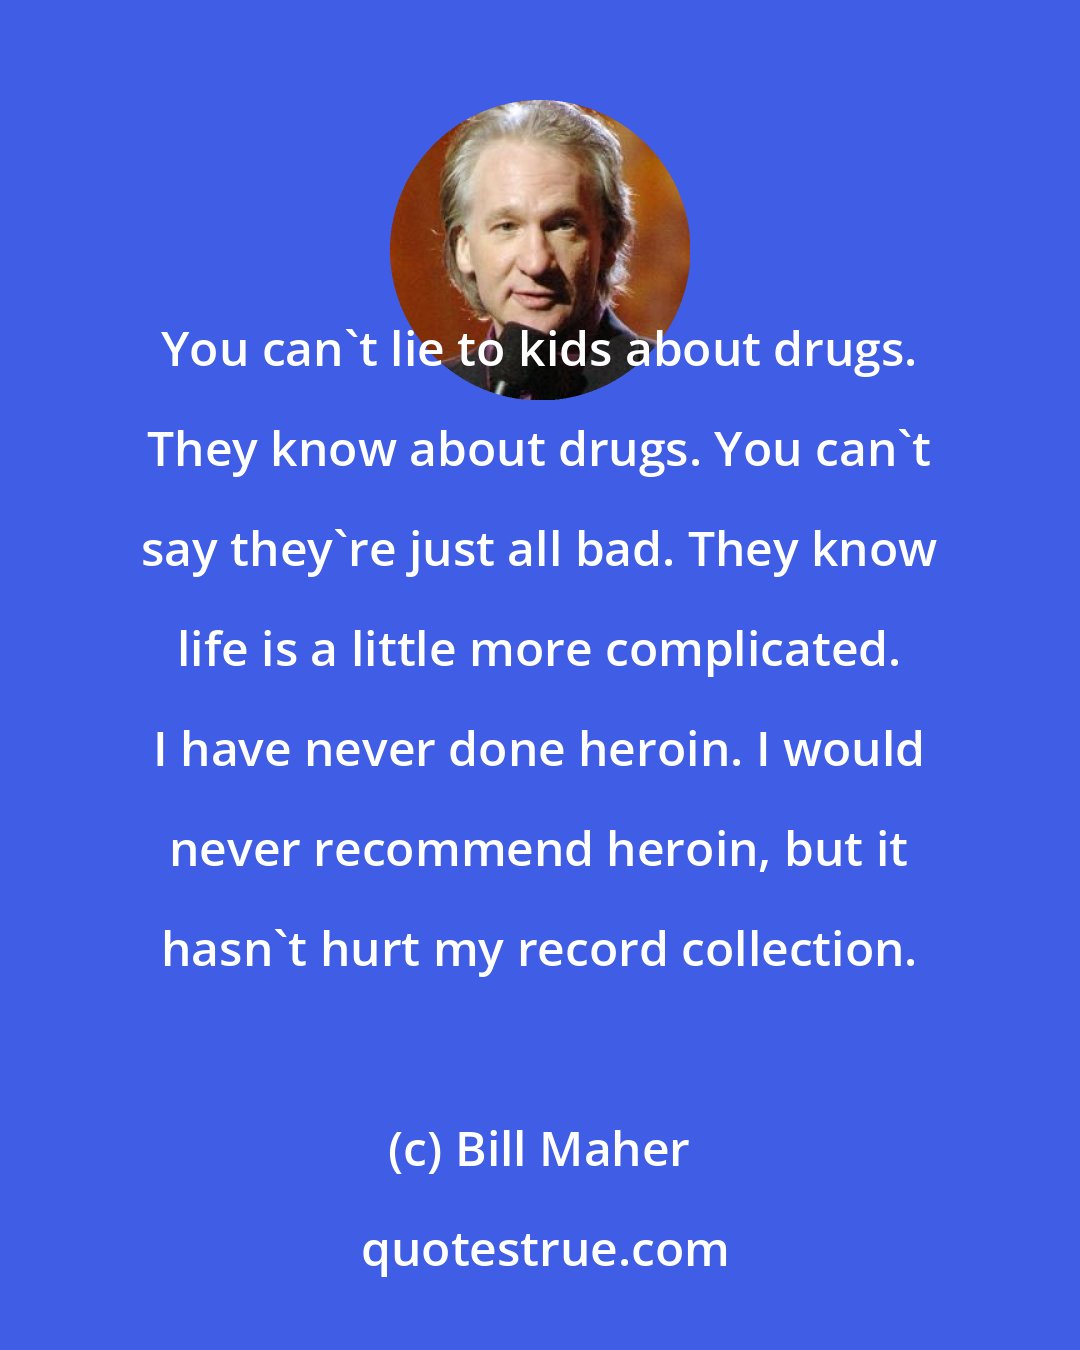 Bill Maher: You can't lie to kids about drugs. They know about drugs. You can't say they're just all bad. They know life is a little more complicated. I have never done heroin. I would never recommend heroin, but it hasn't hurt my record collection.